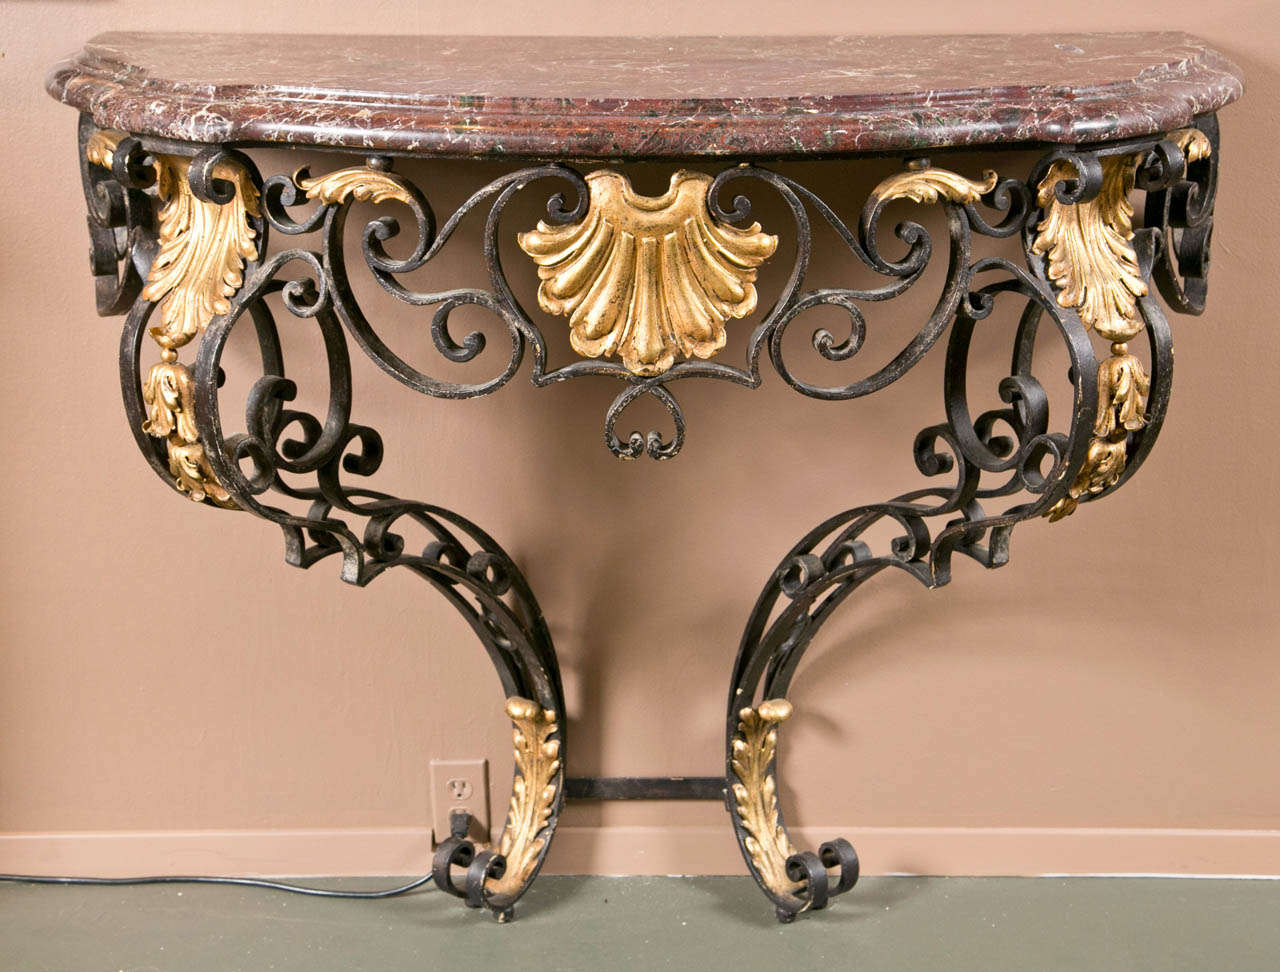 A French partially gilt wrought iron Regency console with an impressive rare purple rouge veiné - Breche d'Alep - marble top.
Elegant proportions and unusually stylish marble color for this perfectly sized console.

Provenance: Private chateau